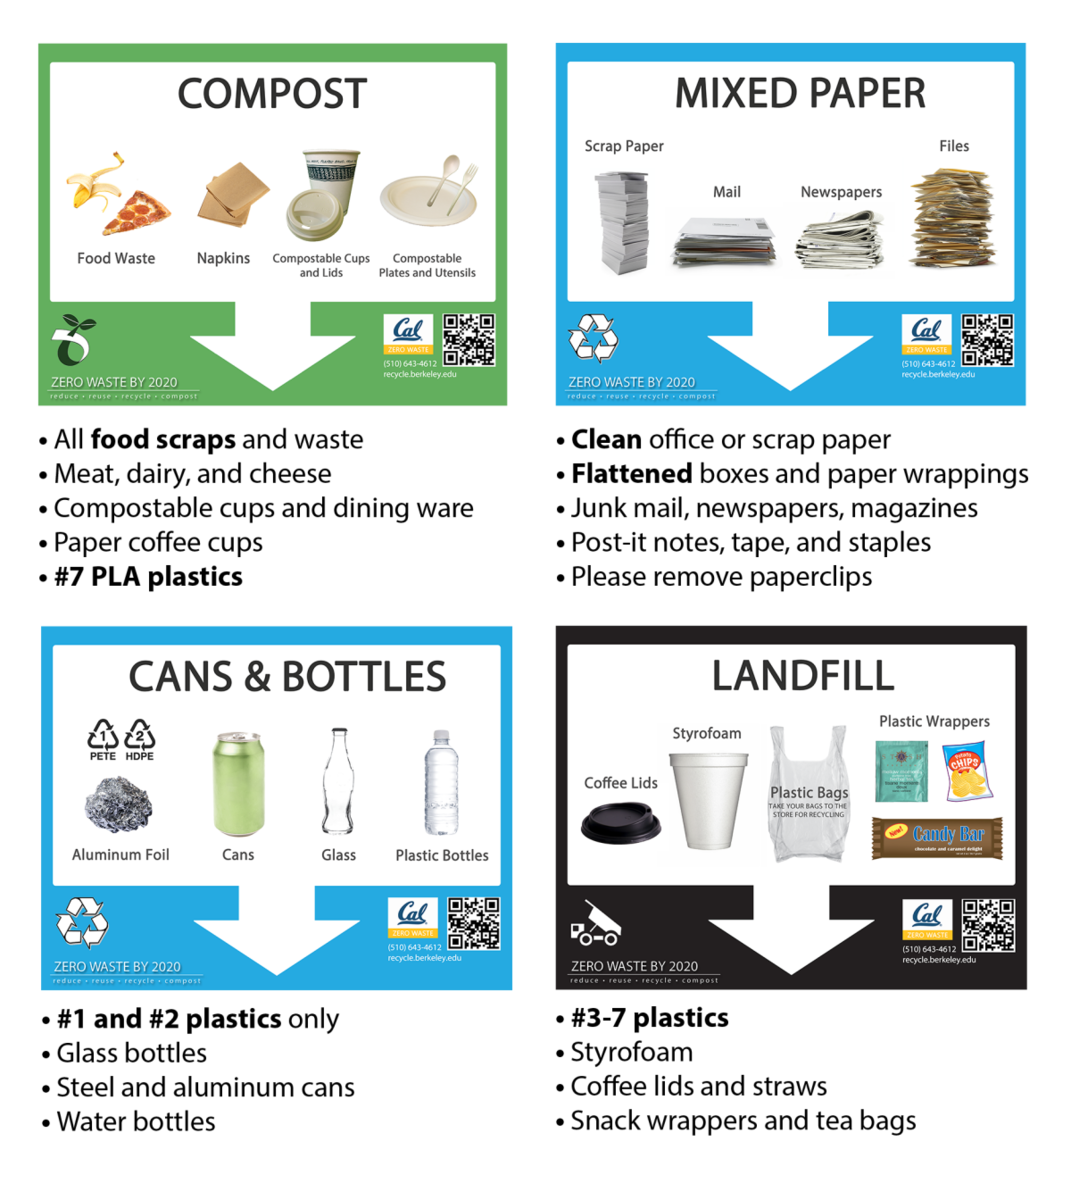 Takeout Containers (Fiber or Paperboard) - Lawrence Berkeley National Lab  Waste Guide